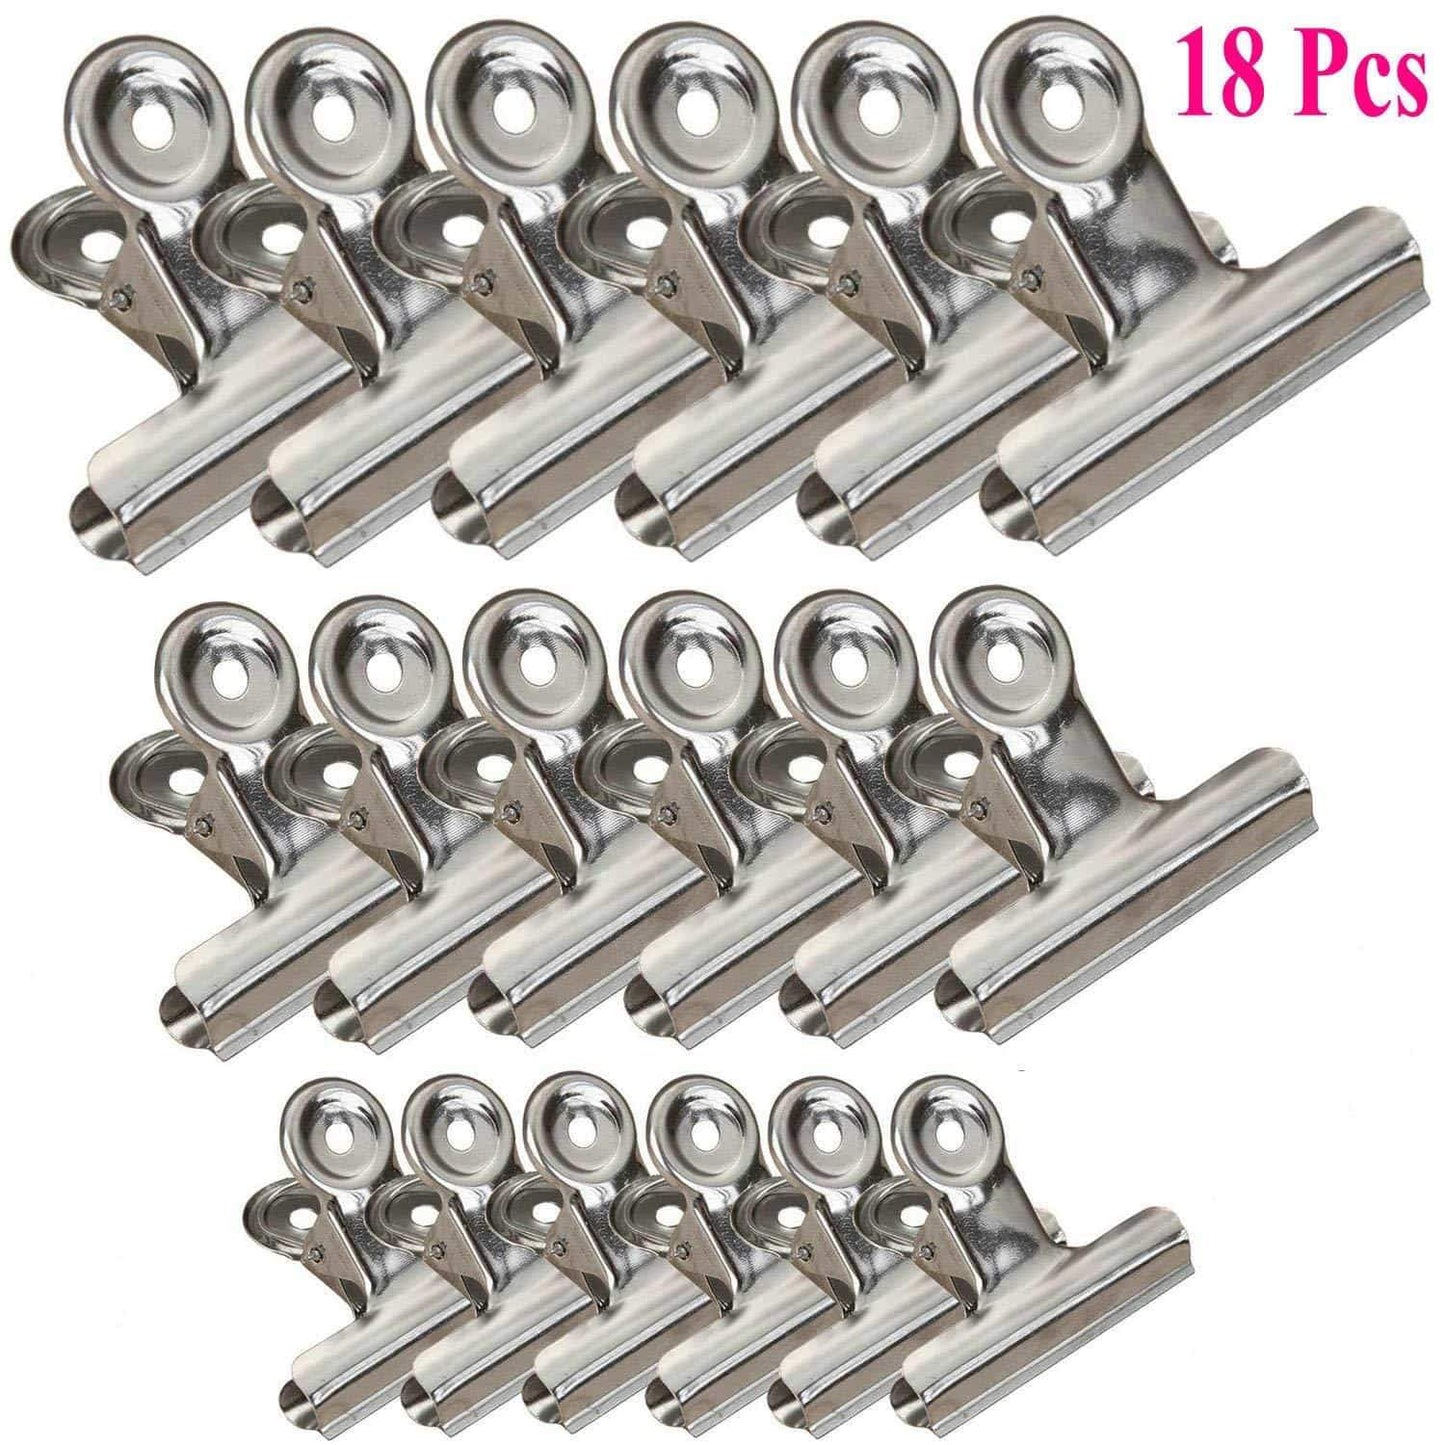 Save chip clips bag clips food clips heavy duty stainless steel clips for bag food bag sealing clips all purpose air tight seal clip cubicle hooks for office school kitchen 18 pack 3 2 5 2